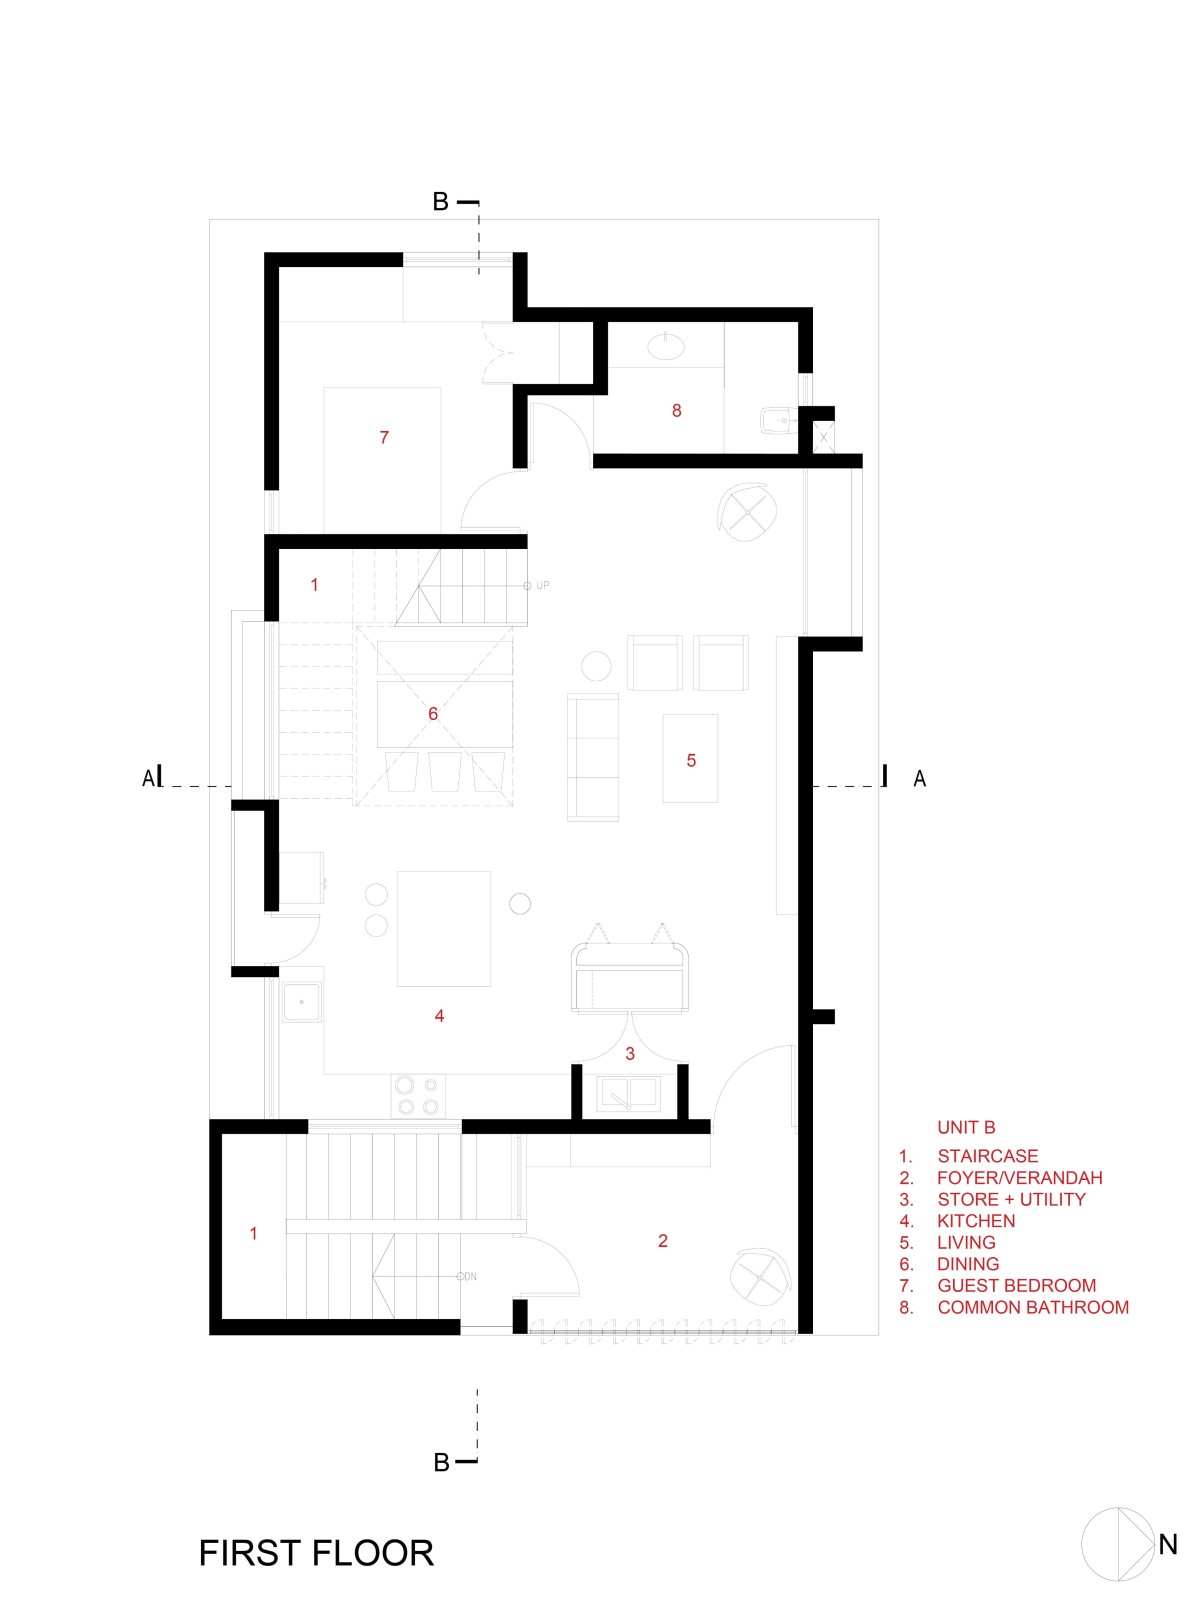 First floor plan of Lucid House by ma+rs